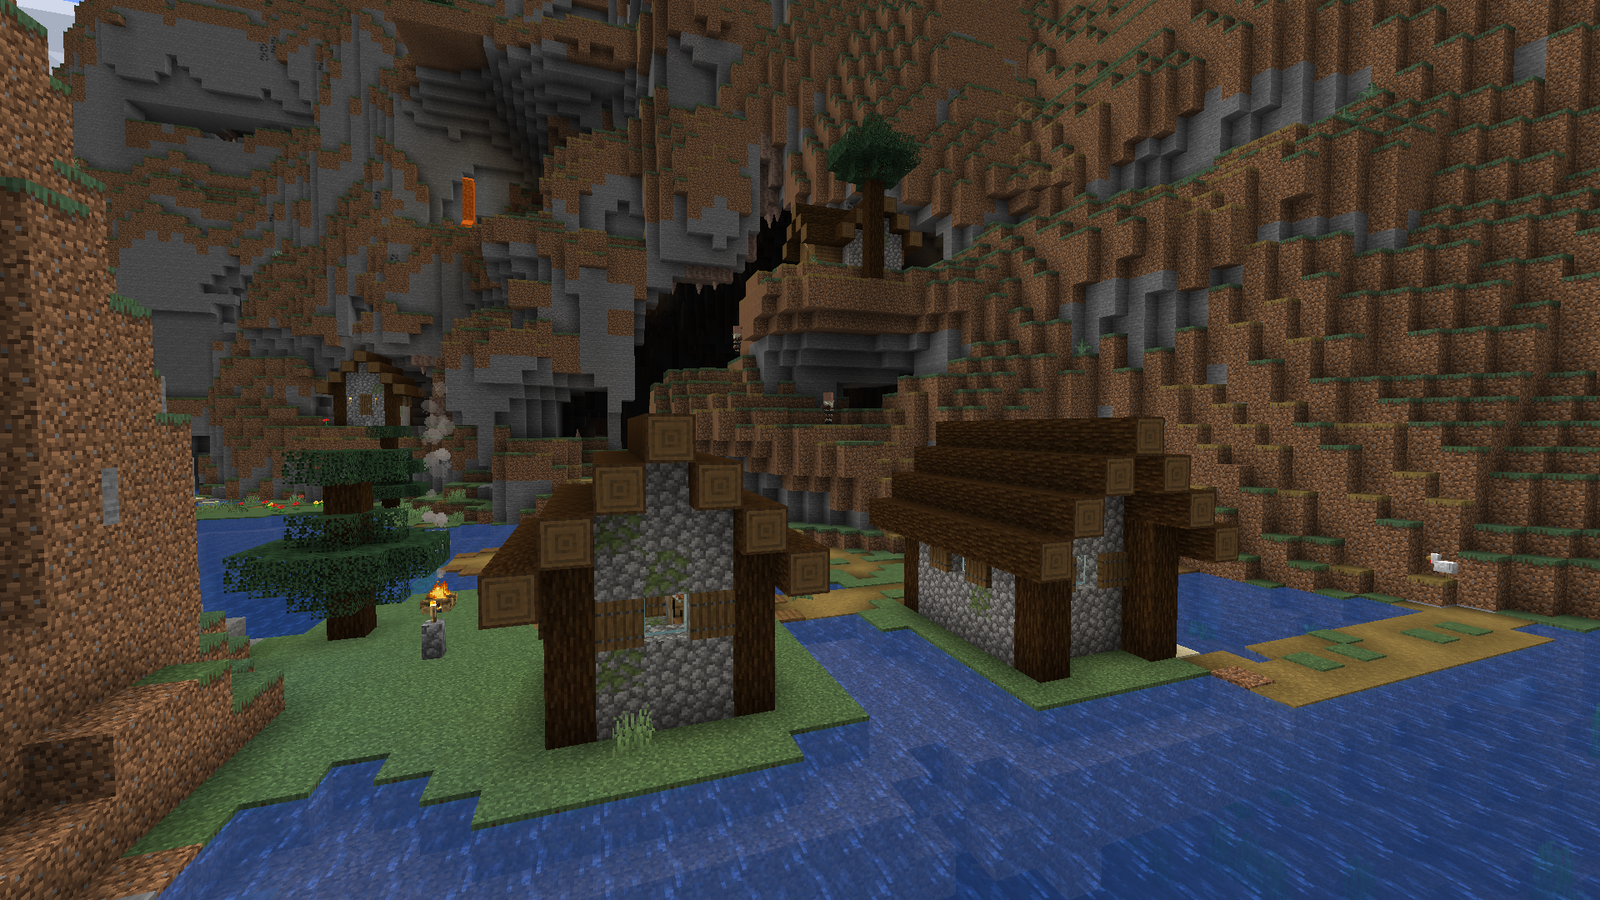 A Minecraft village at the bottom of a ravine, with the opening to a large cave behind it.